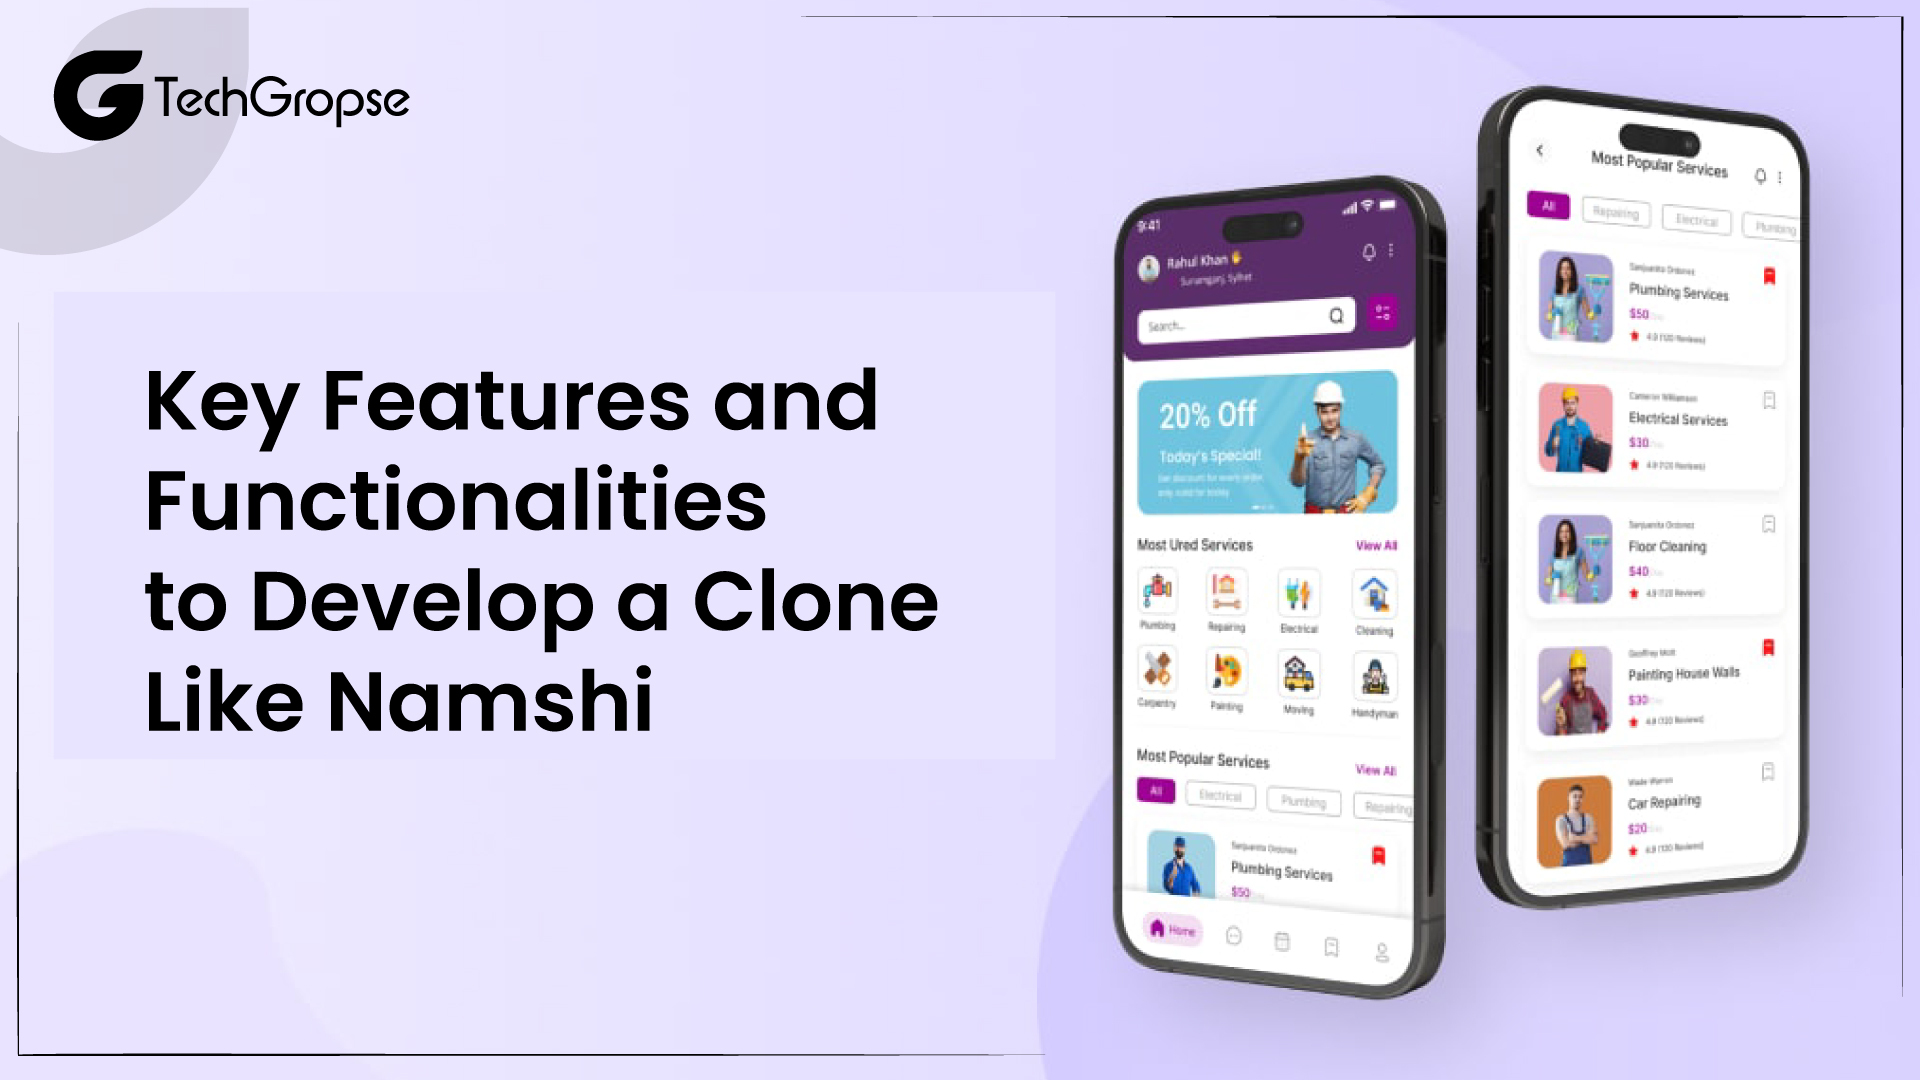 Key Features and Functionalities to Develop a Clone Like Namshi